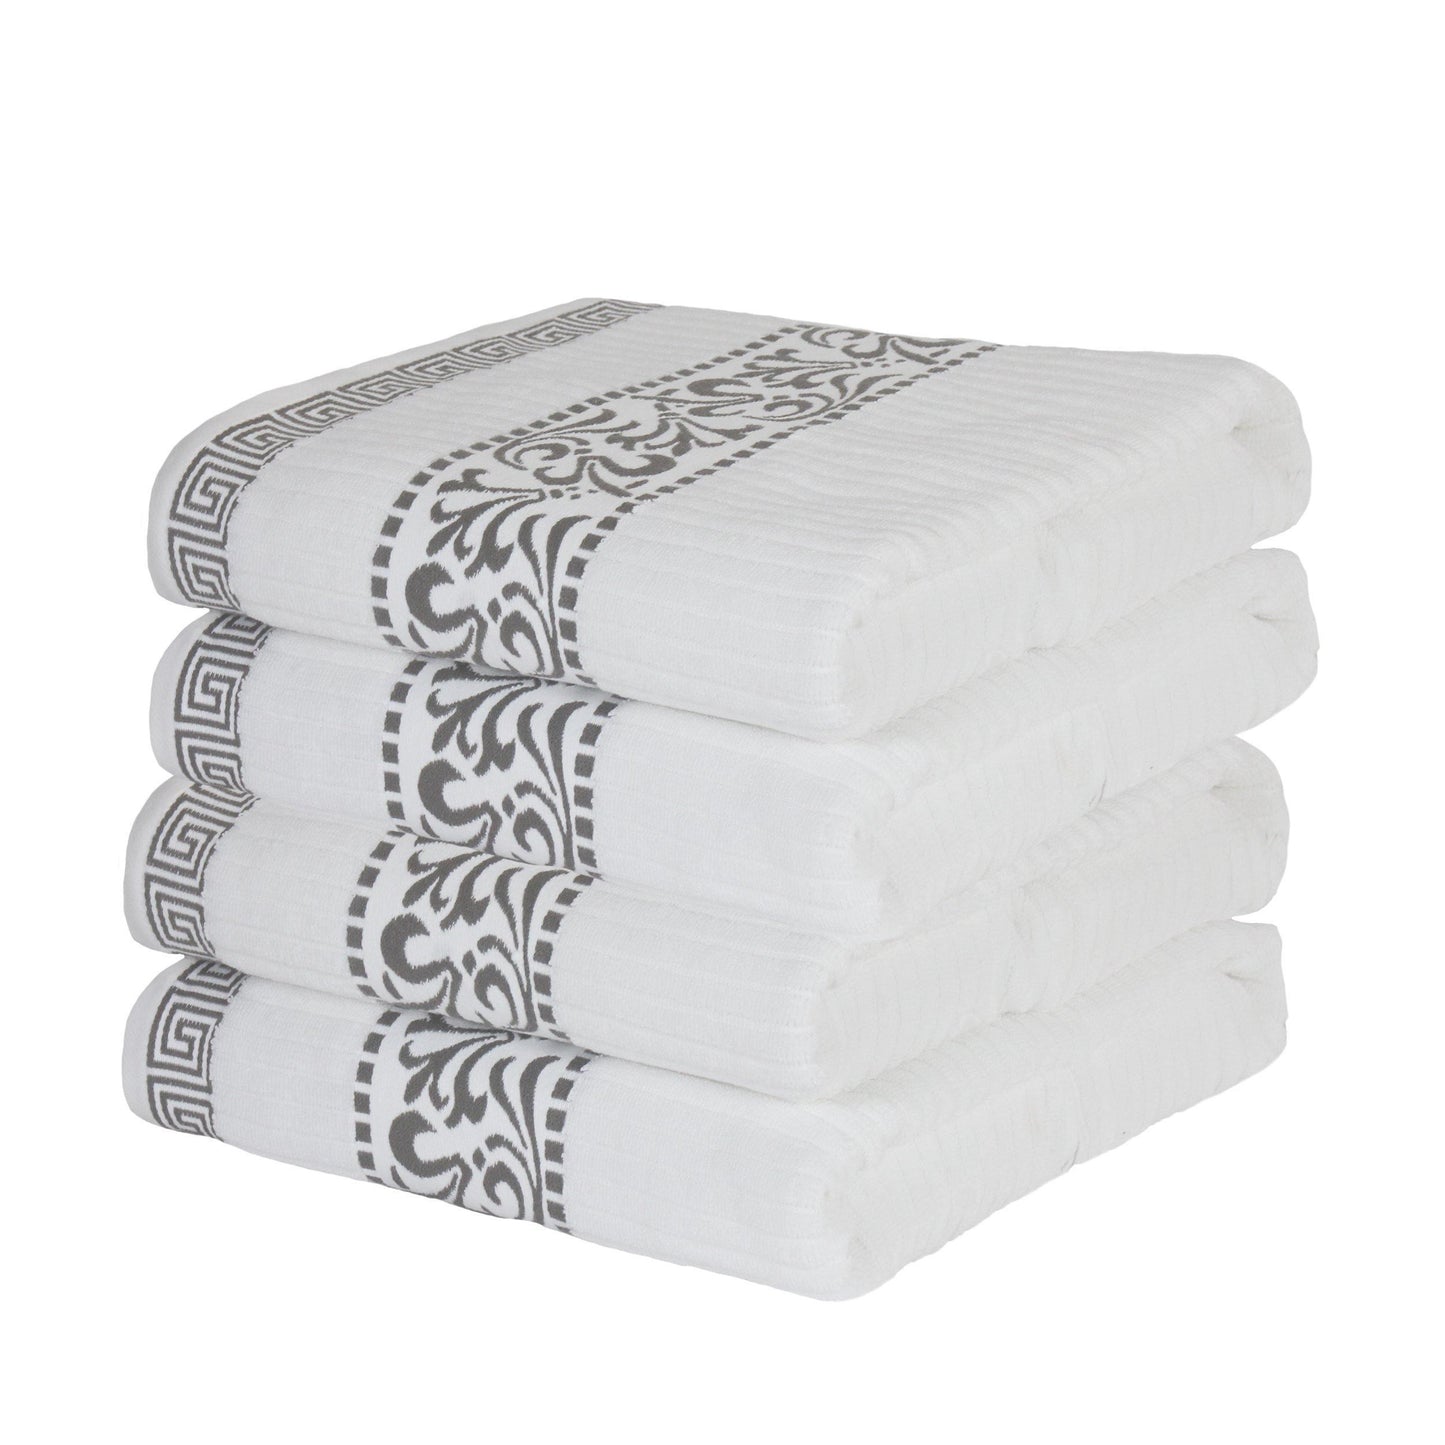 Cotton Absorbent 4-Piece Bath Towel 30" x 52" by Superior FredCo